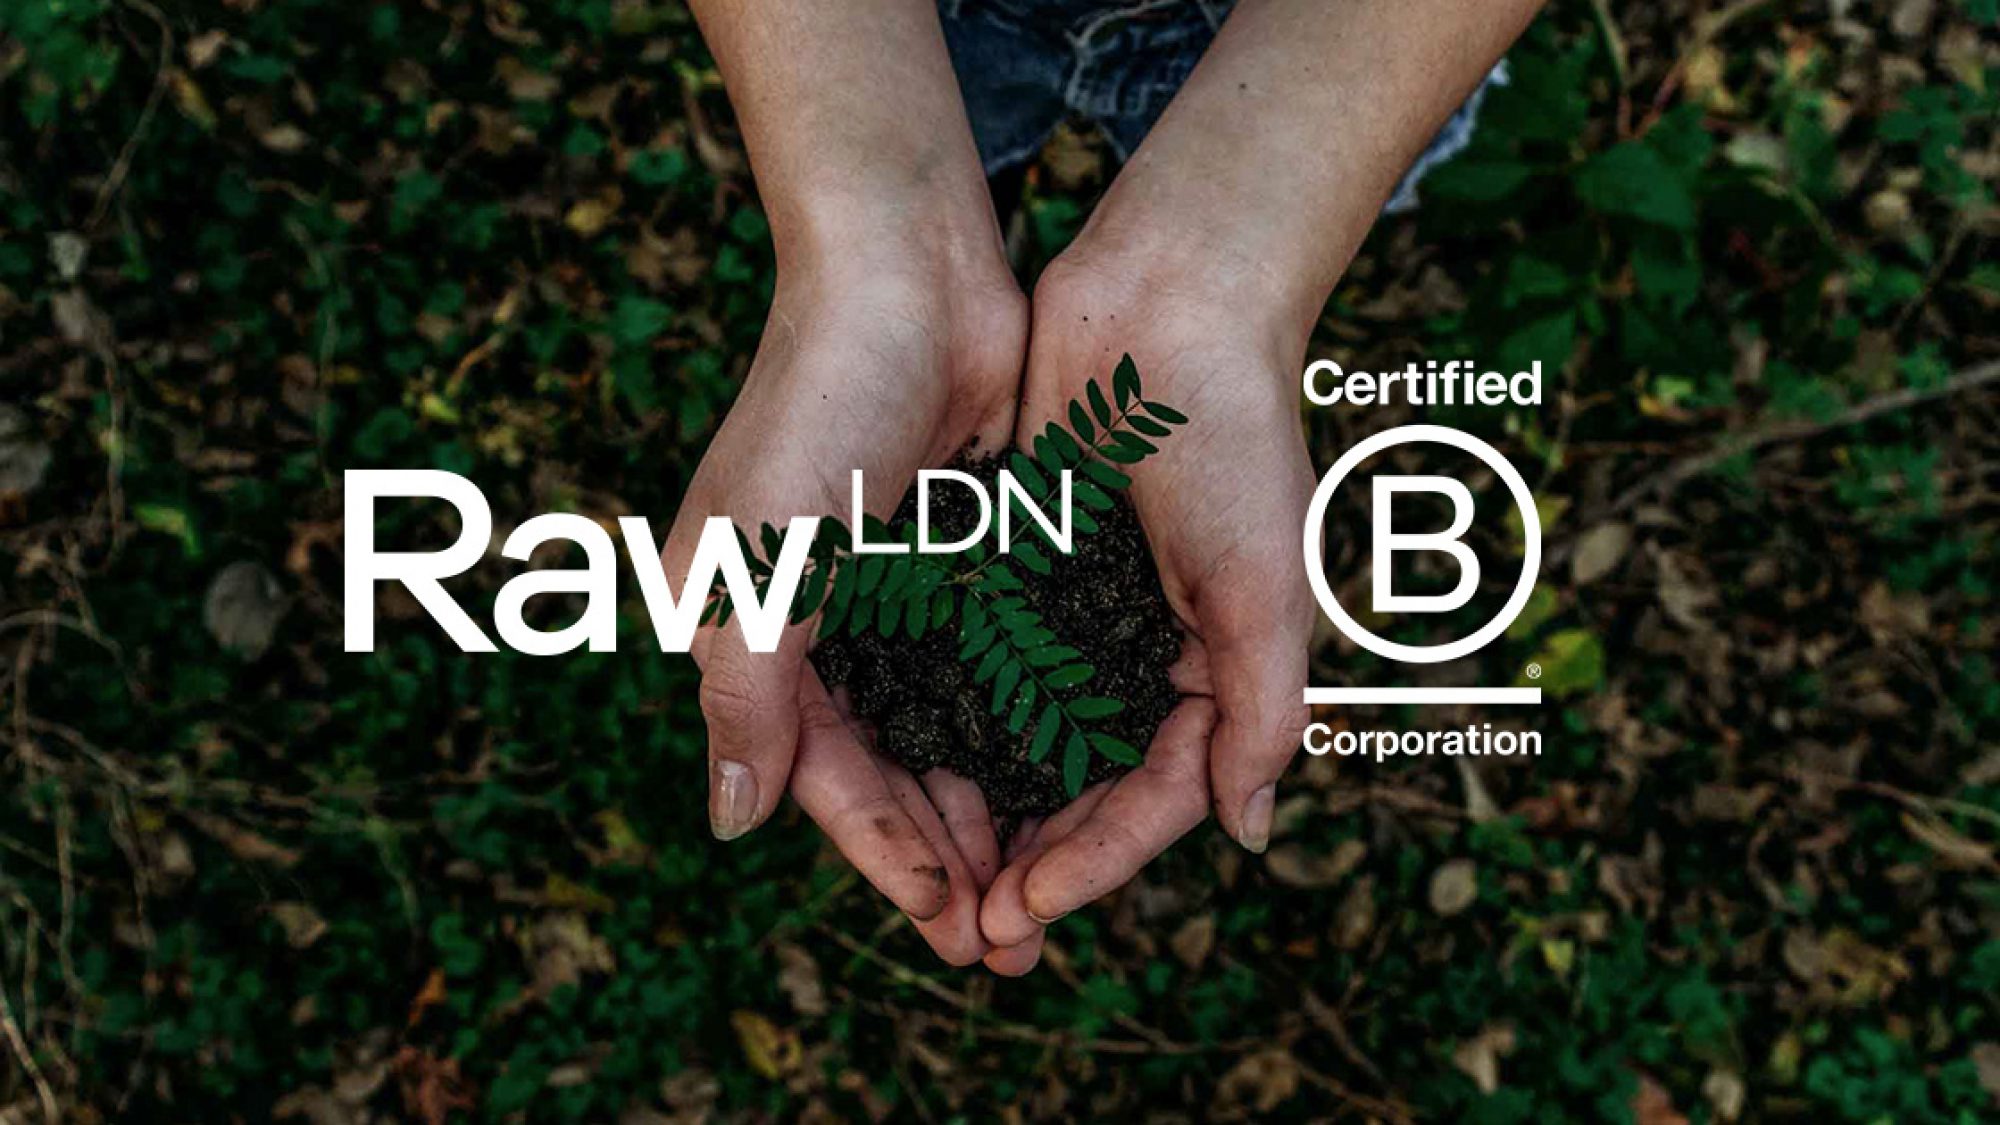 B Corporation logo and Raw London logo over hands holding a plant